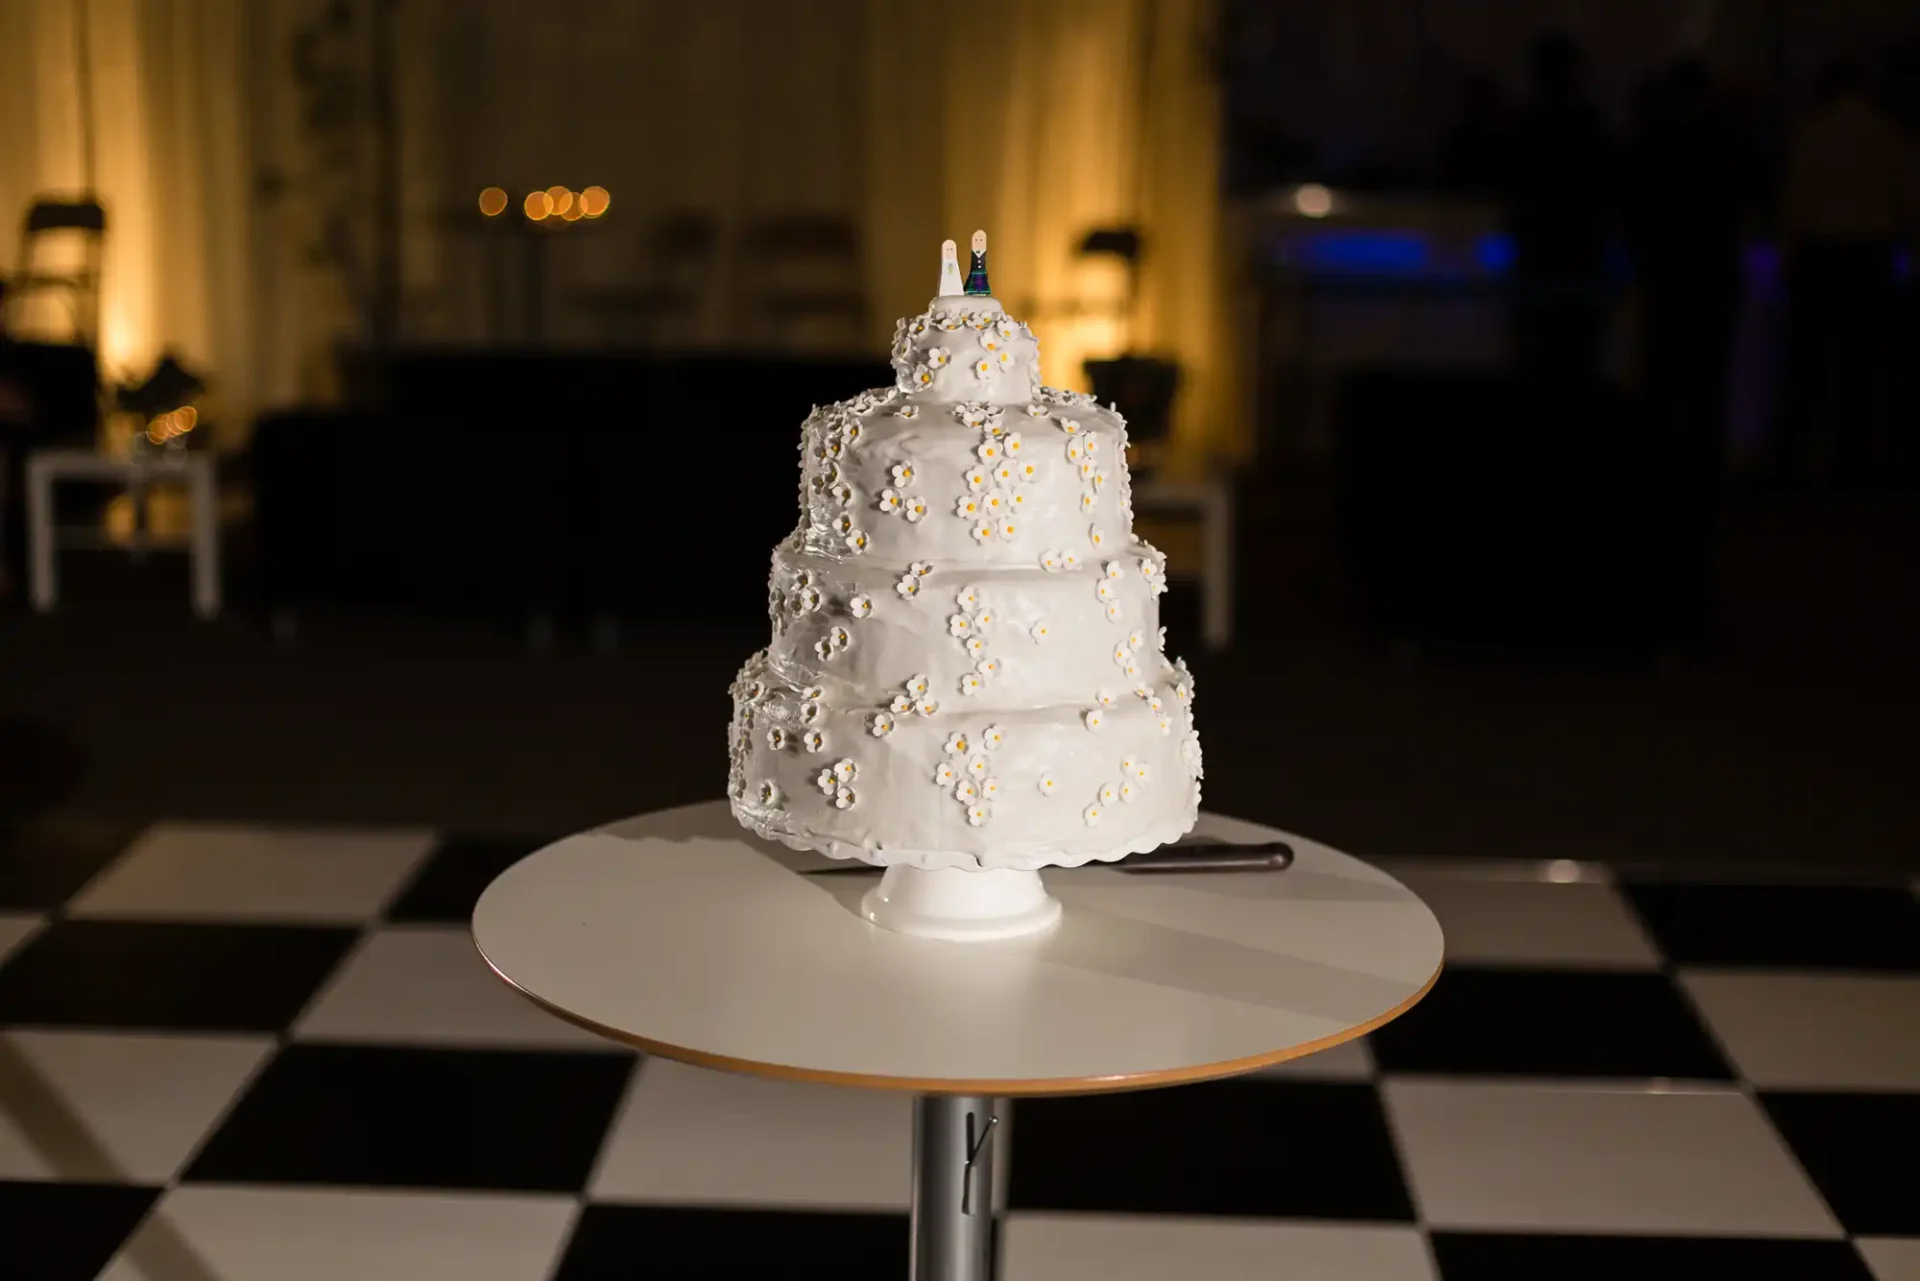 A three-tiered white wedding cake decorated with pearls and gold flowers, displayed on a small table with a checkered floor background.